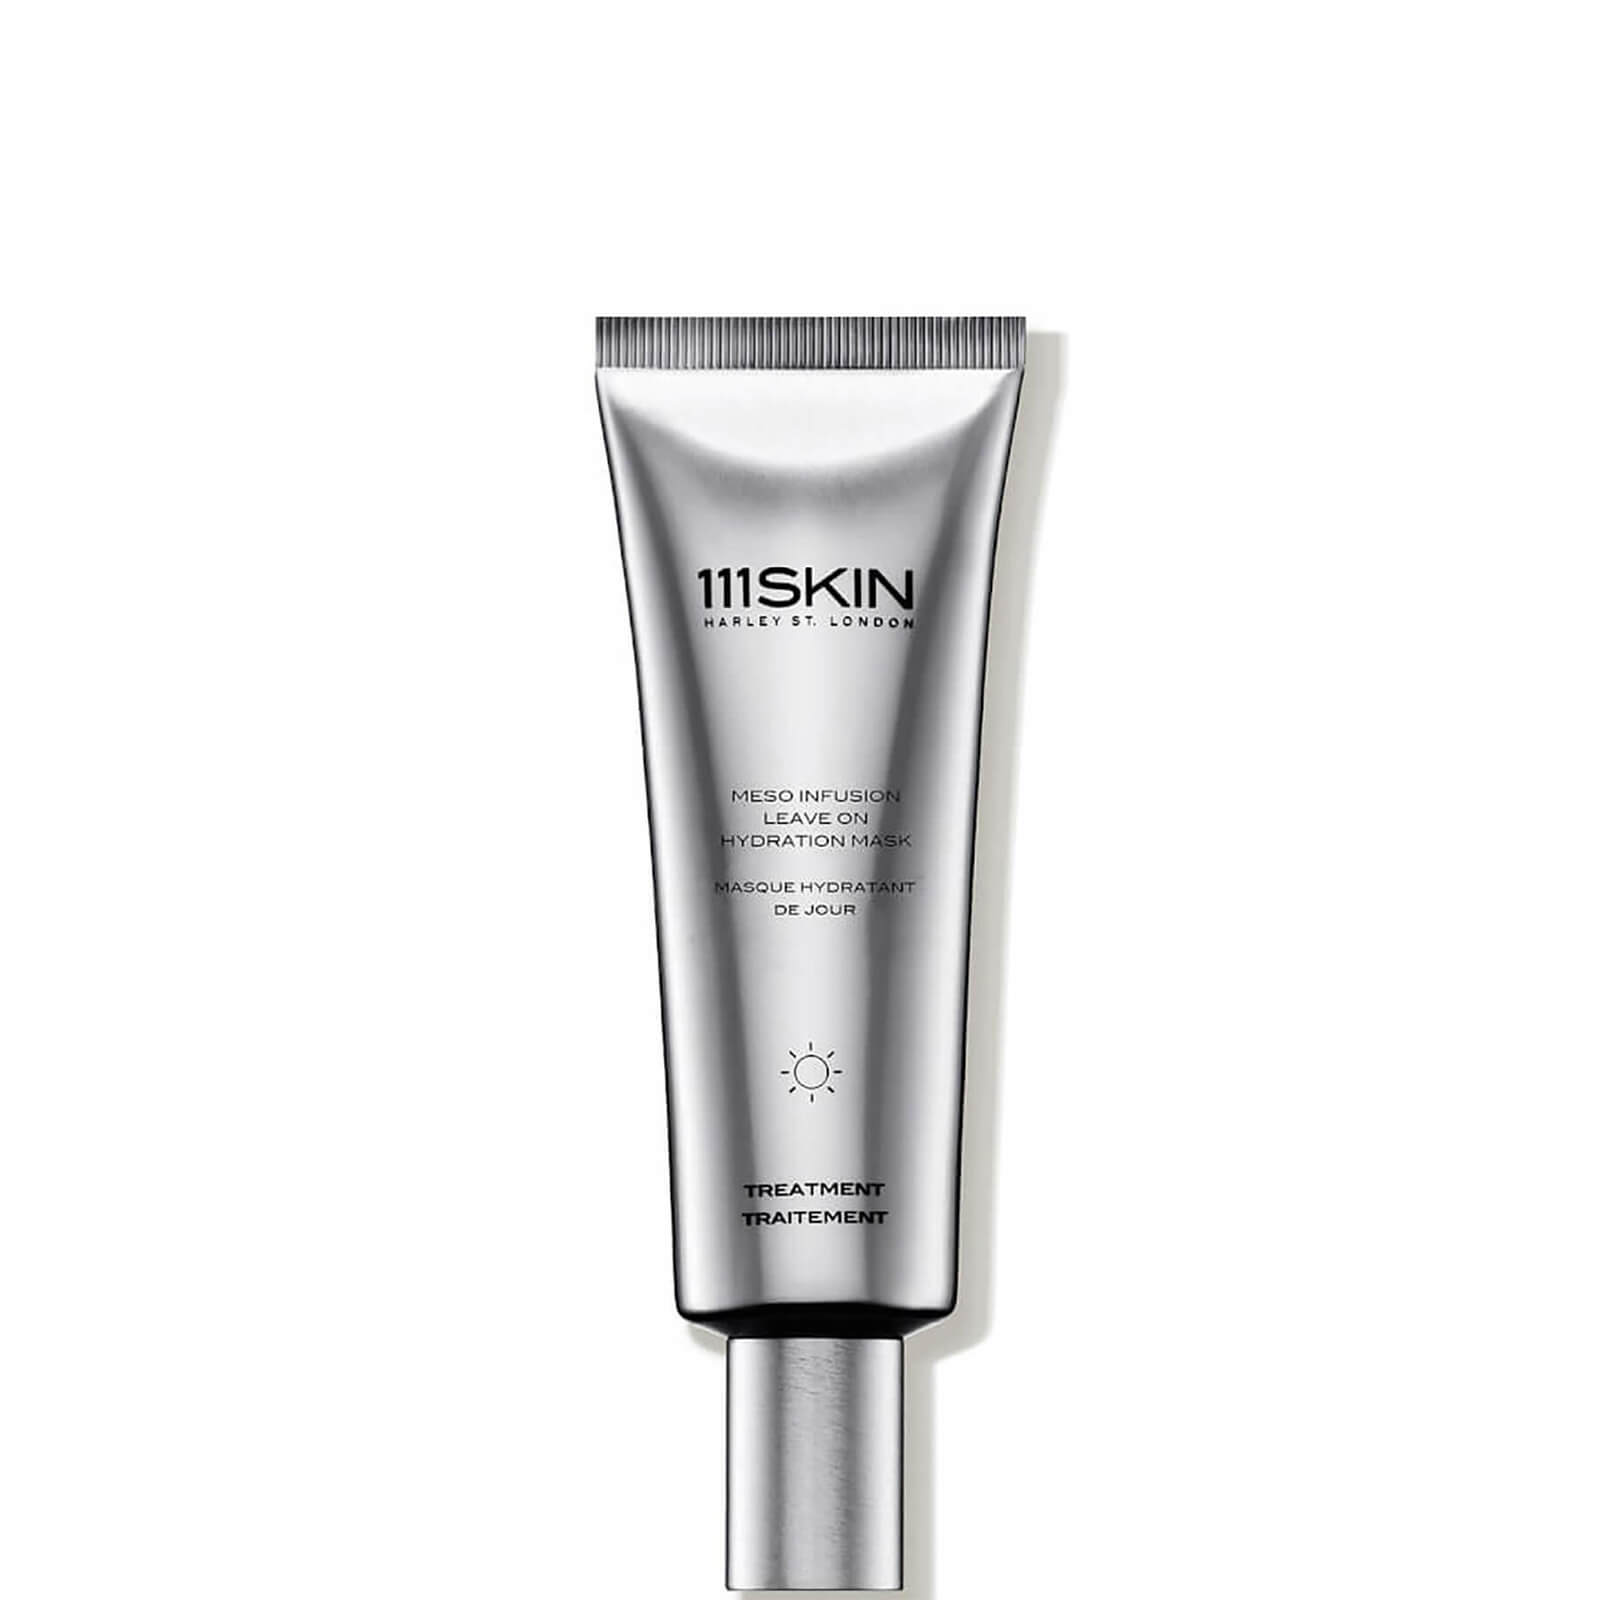 111SKIN Meso Infusion Leave on Hydration Mask 75ml